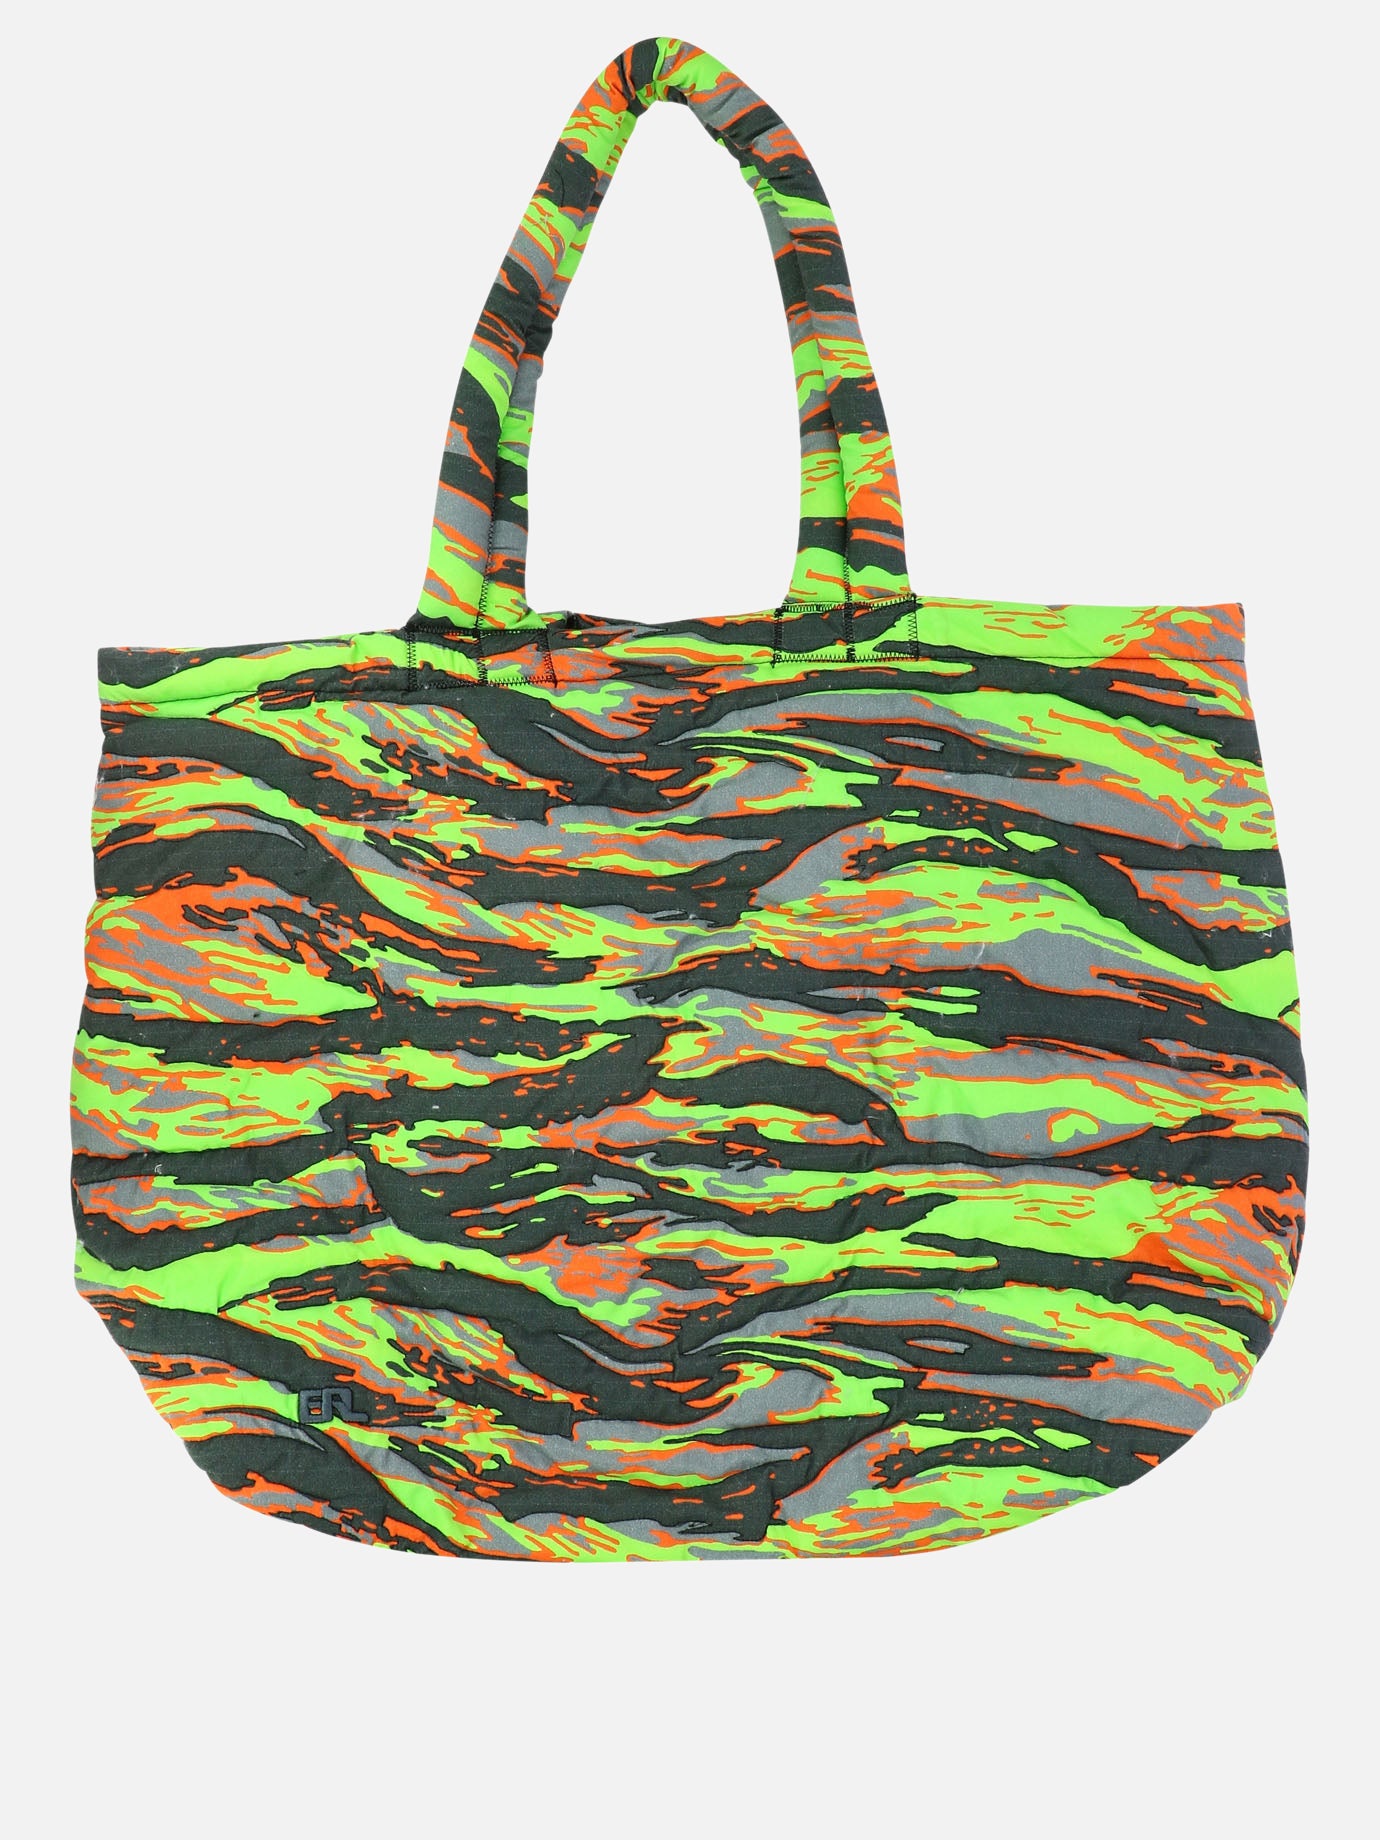 "Camouflage" tote bag